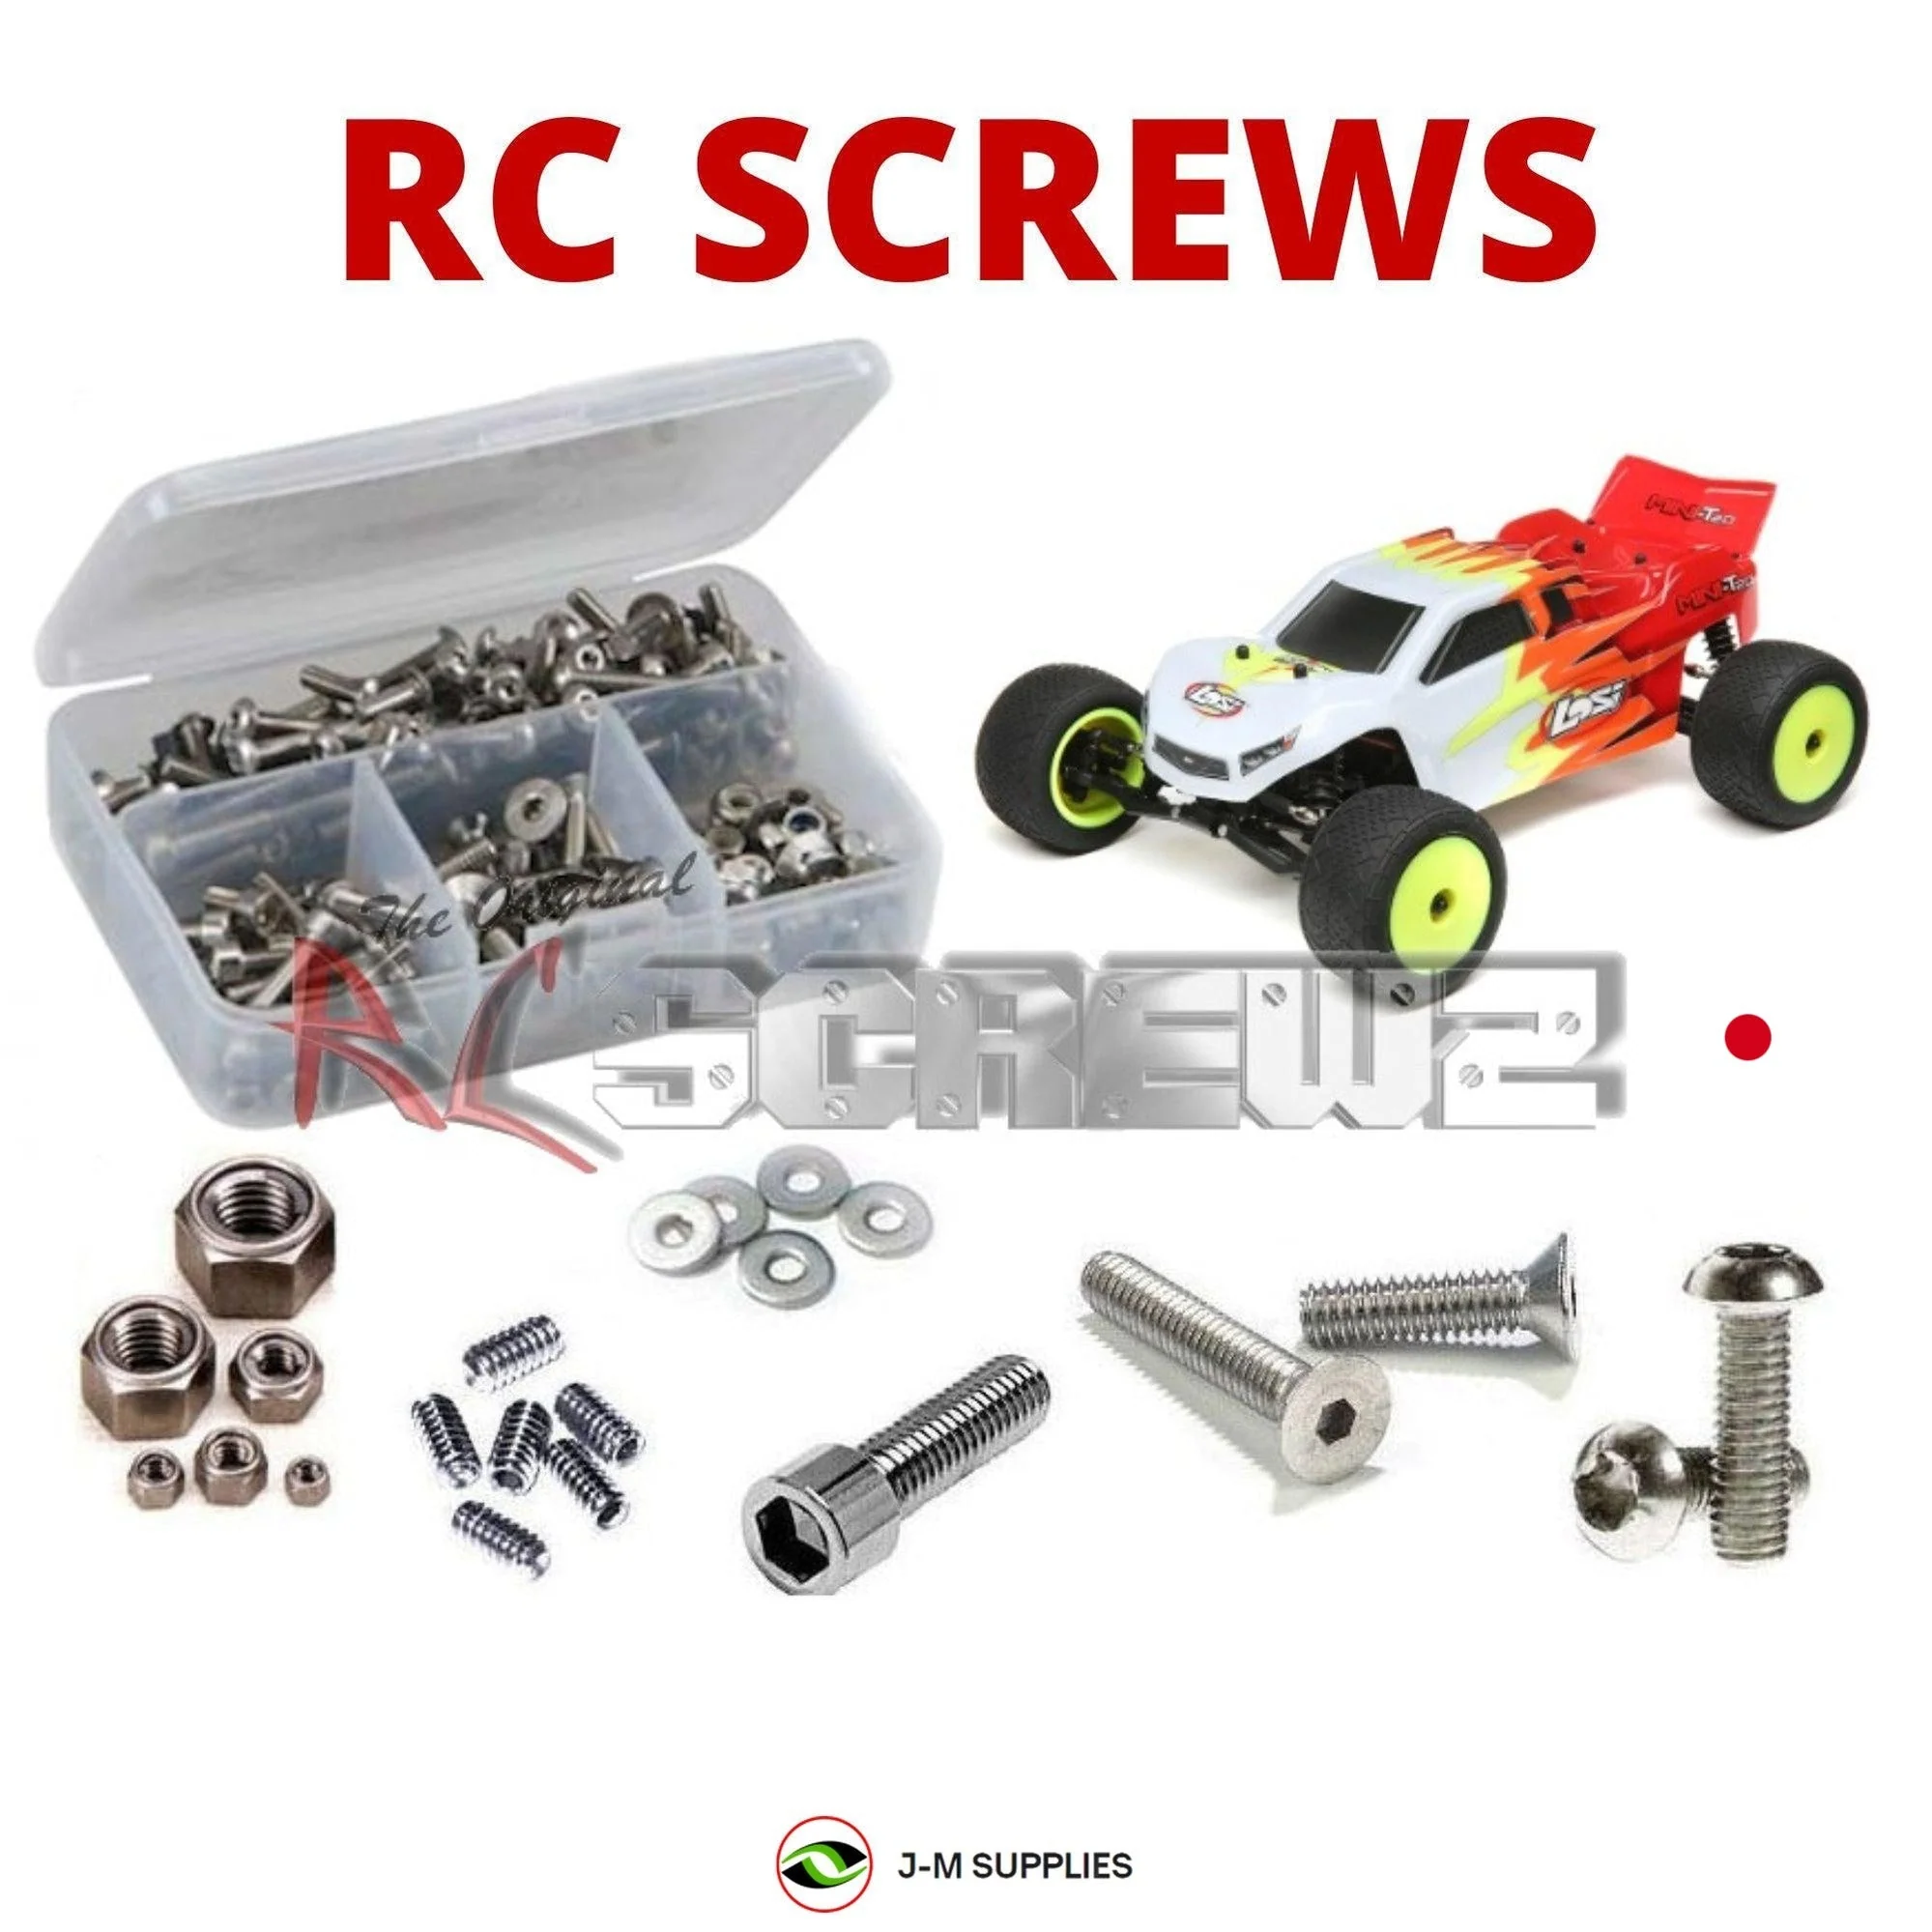 RCScrewZ Stainless Screw Kit los113 for Losi Mini-T 2.0 2WD (#LOS01015/17) Truck - Picture 1 of 12